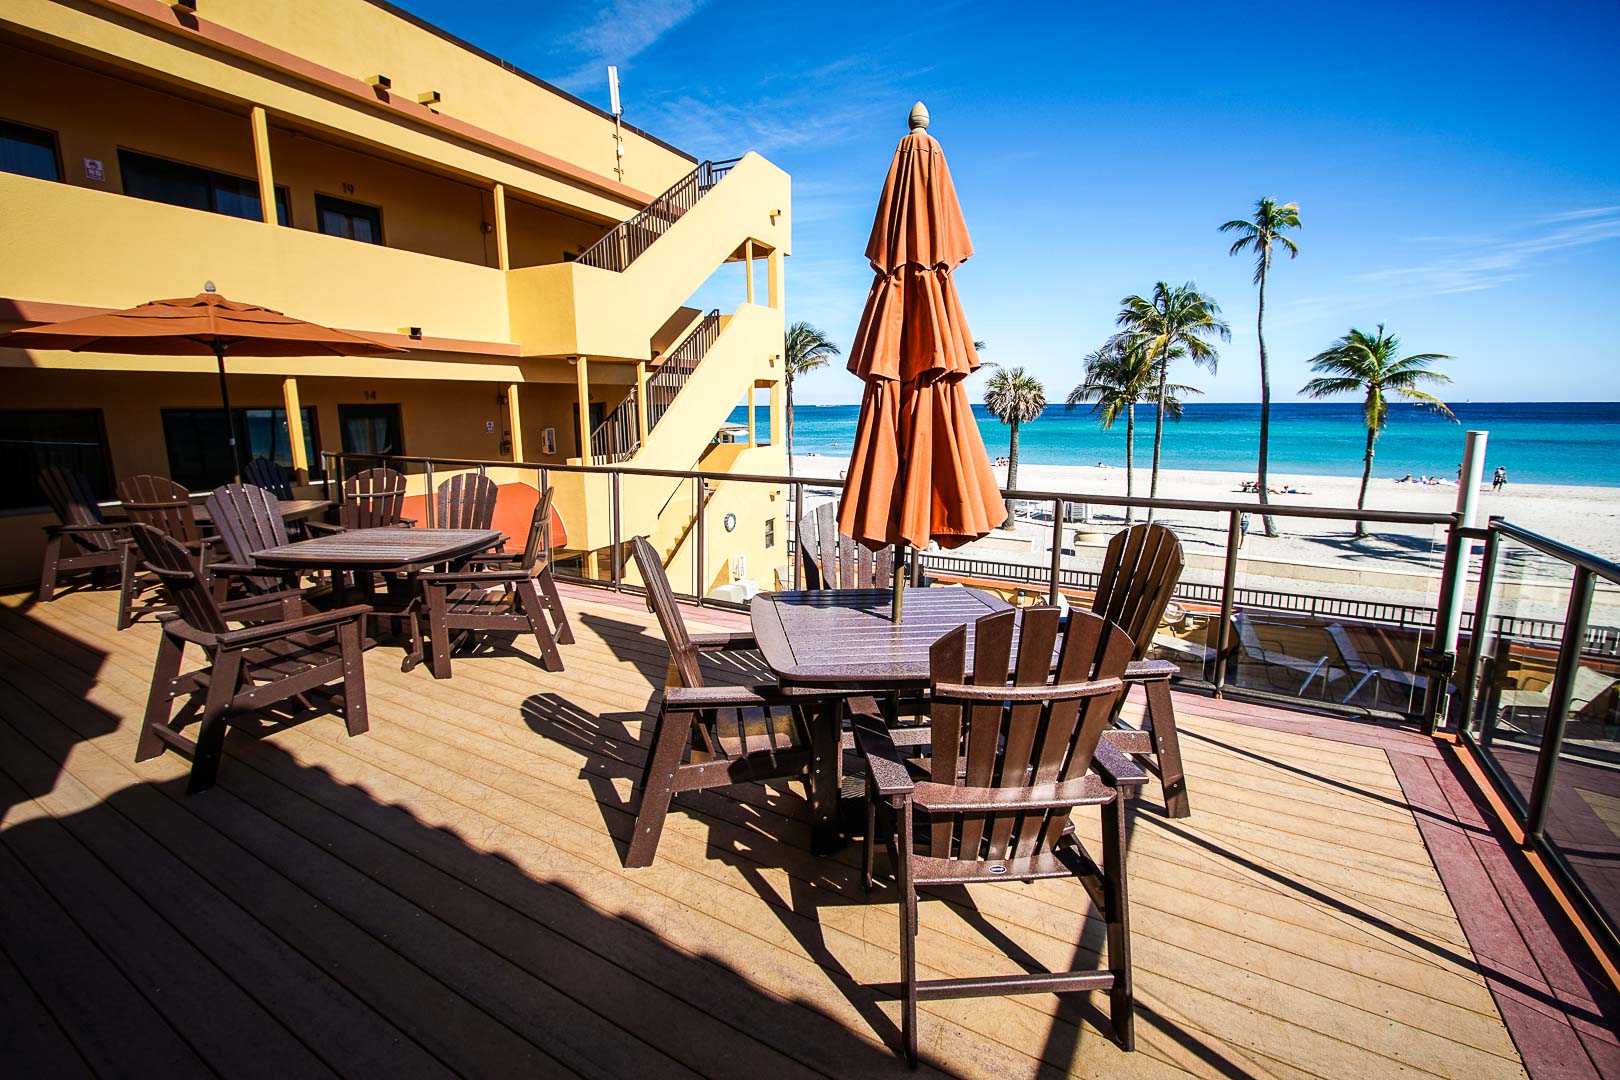 A beach view from the resort's patio deck at VRI's Hollywood Sands Resort in Hollywood, Florida.